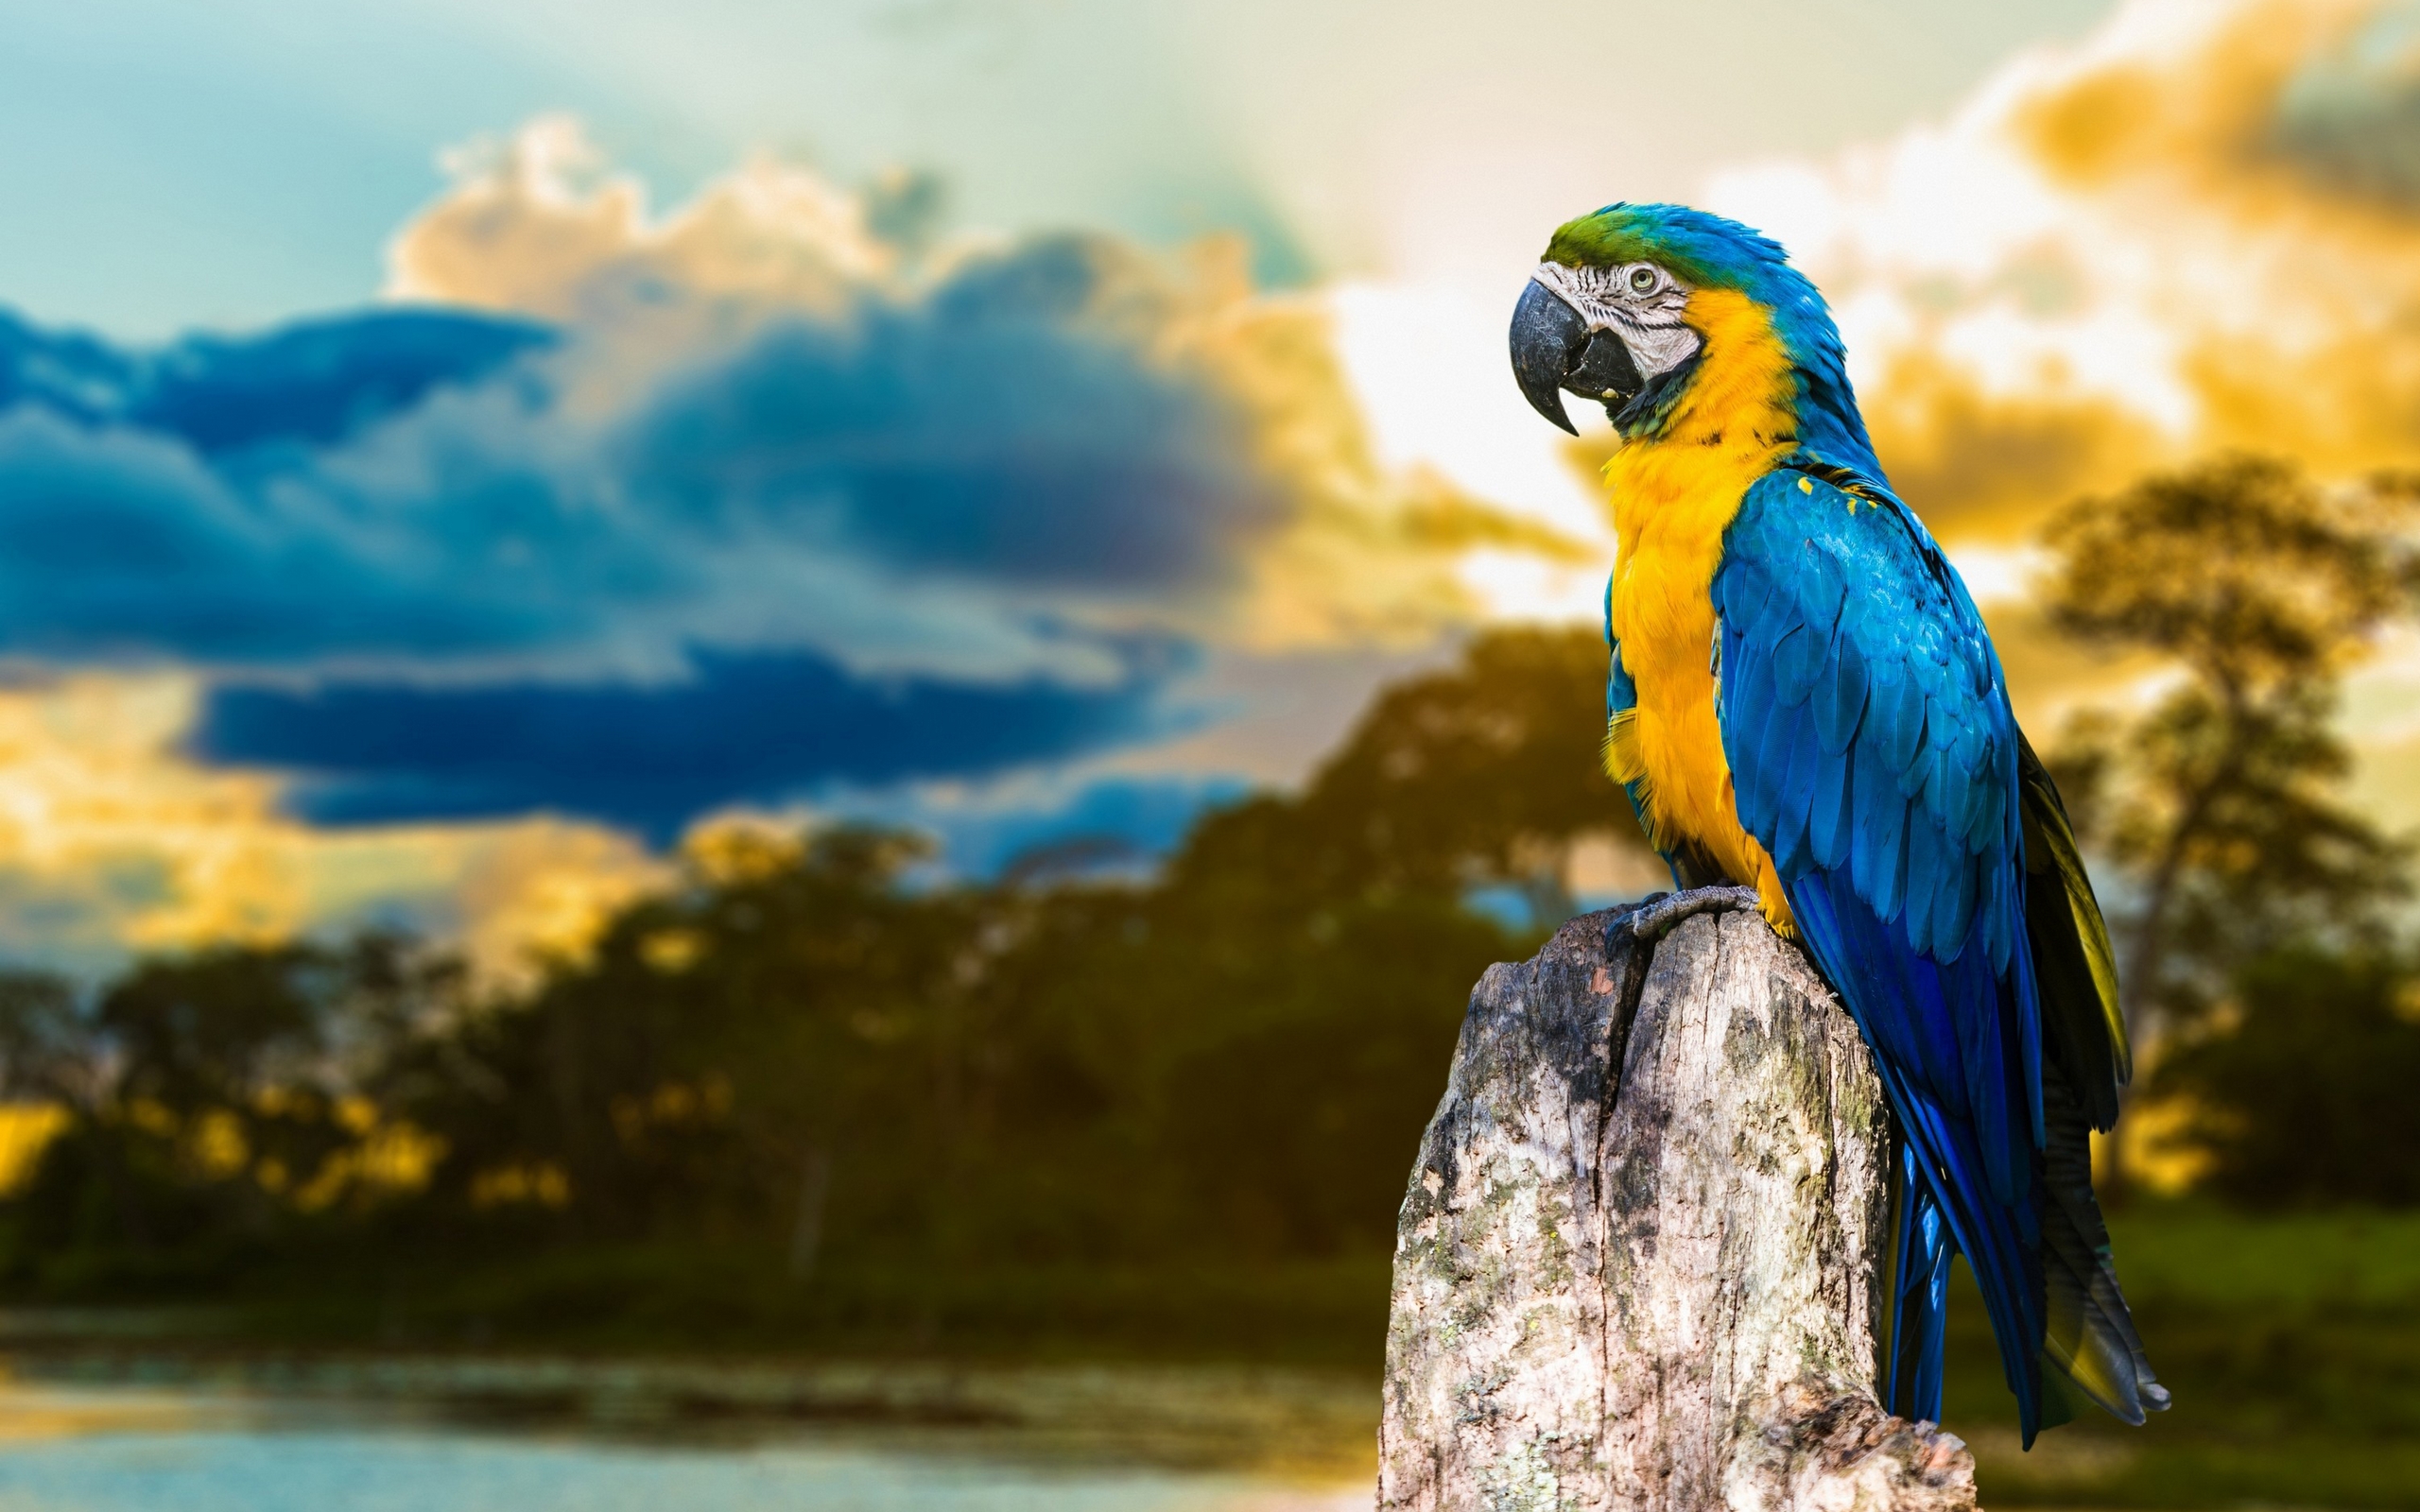 Blue and yellow Macaw HD Wallpaper Background Image 2560x1600